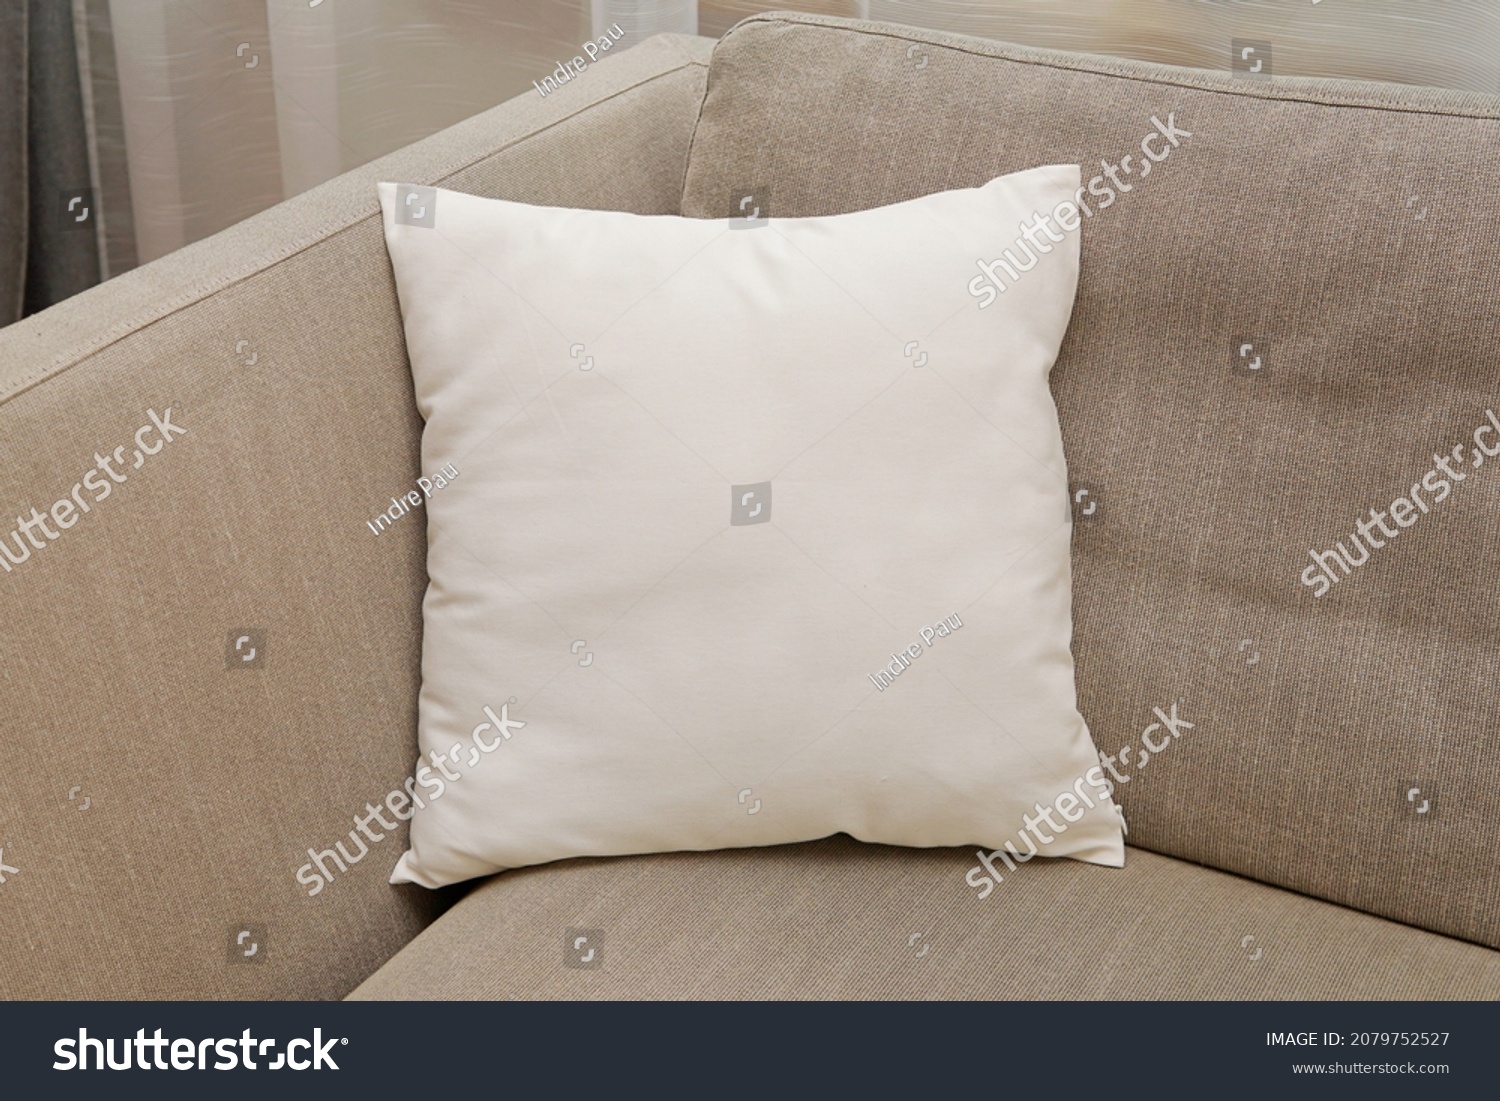 White square canvas pillow mockup on cozy couch, small cotton cushion mockup in living room interior., space for design presentation. #2079752527